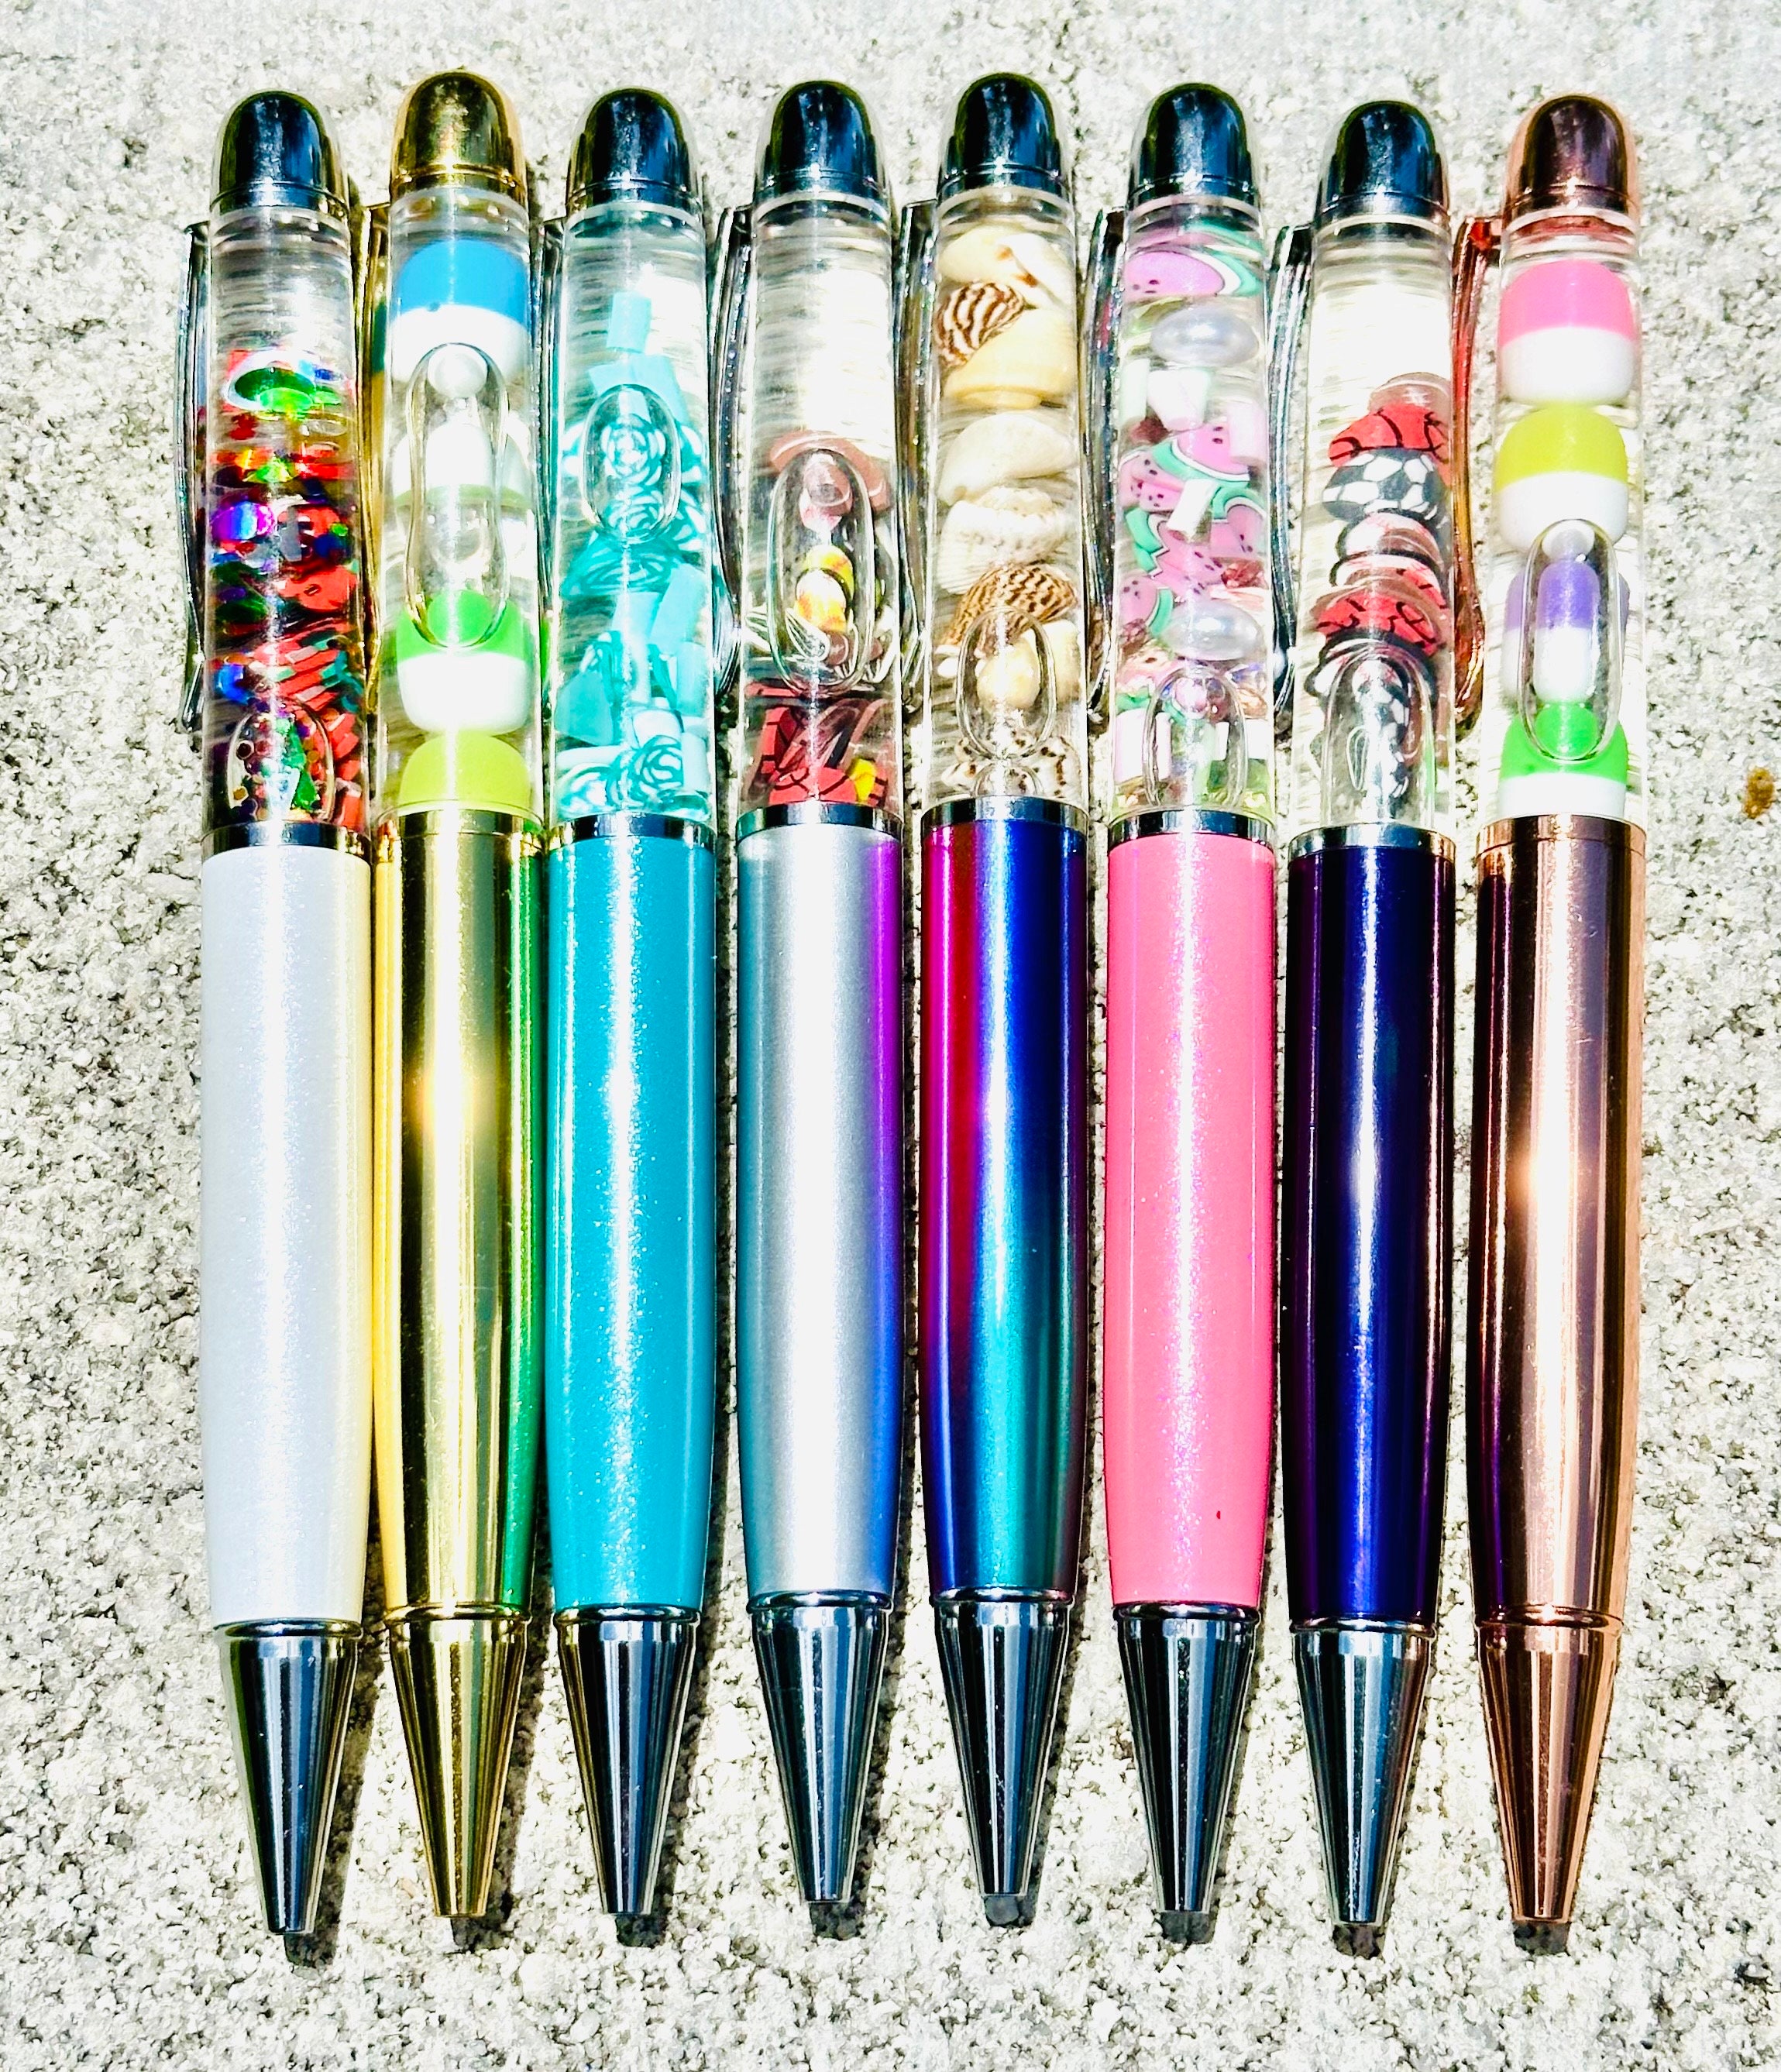 RAINBOW RHINESTONE PEN TUTORIAL FOR BEGINNERS 🌈 // How to Make DIY Striped  Papermate Bling Pens 